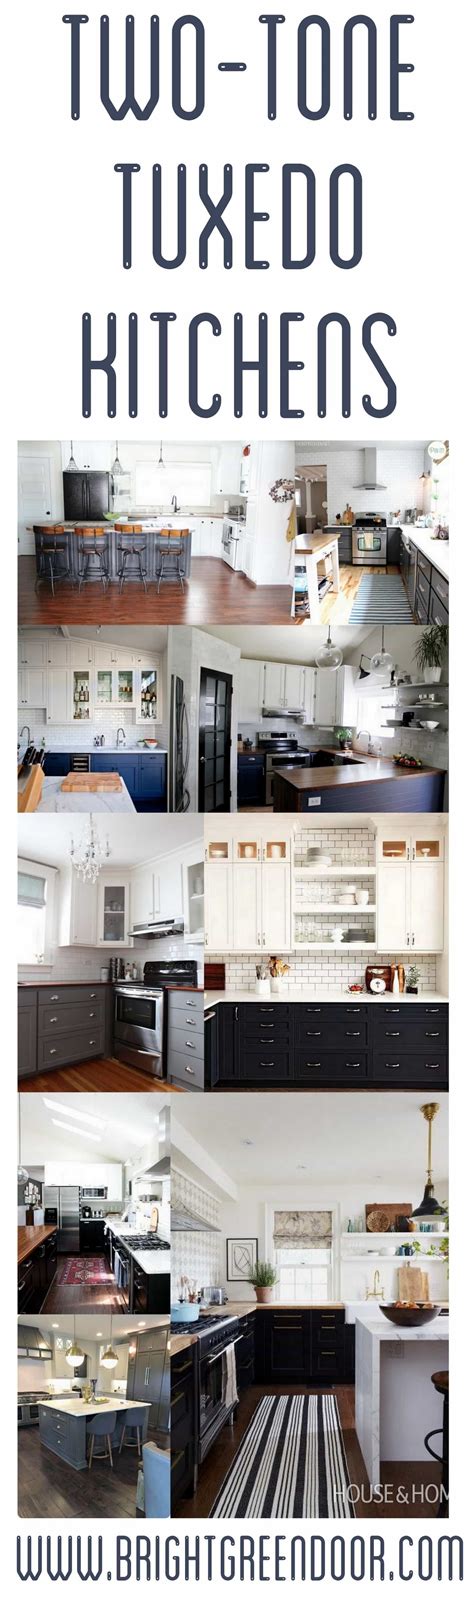 Homeowners can also include additional elements that contribute to the black and white effect, such as a black island or black countertops to separate white upper and lower cabinets. The Look- Two Tone Tuxedo Kitchen - Bright Green Door